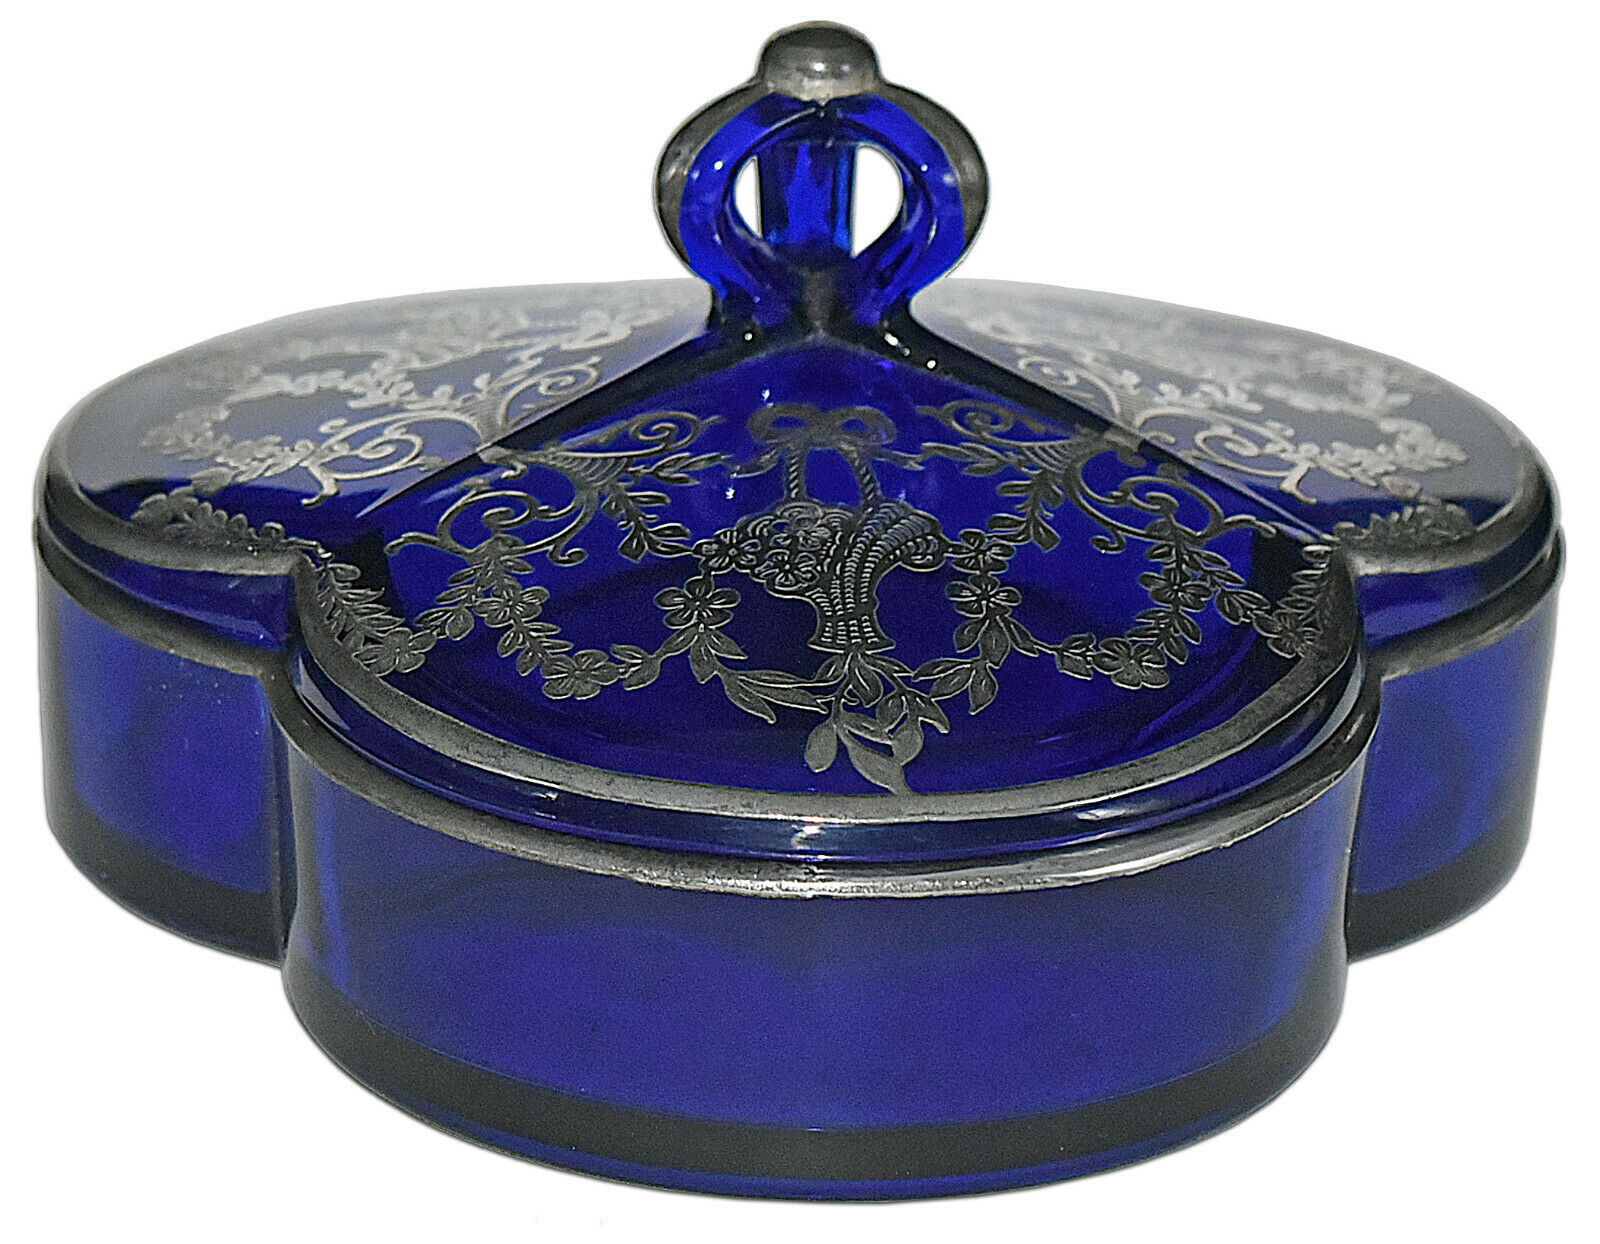 Duncan and Miller #106 Cobalt Covered Candy Dish